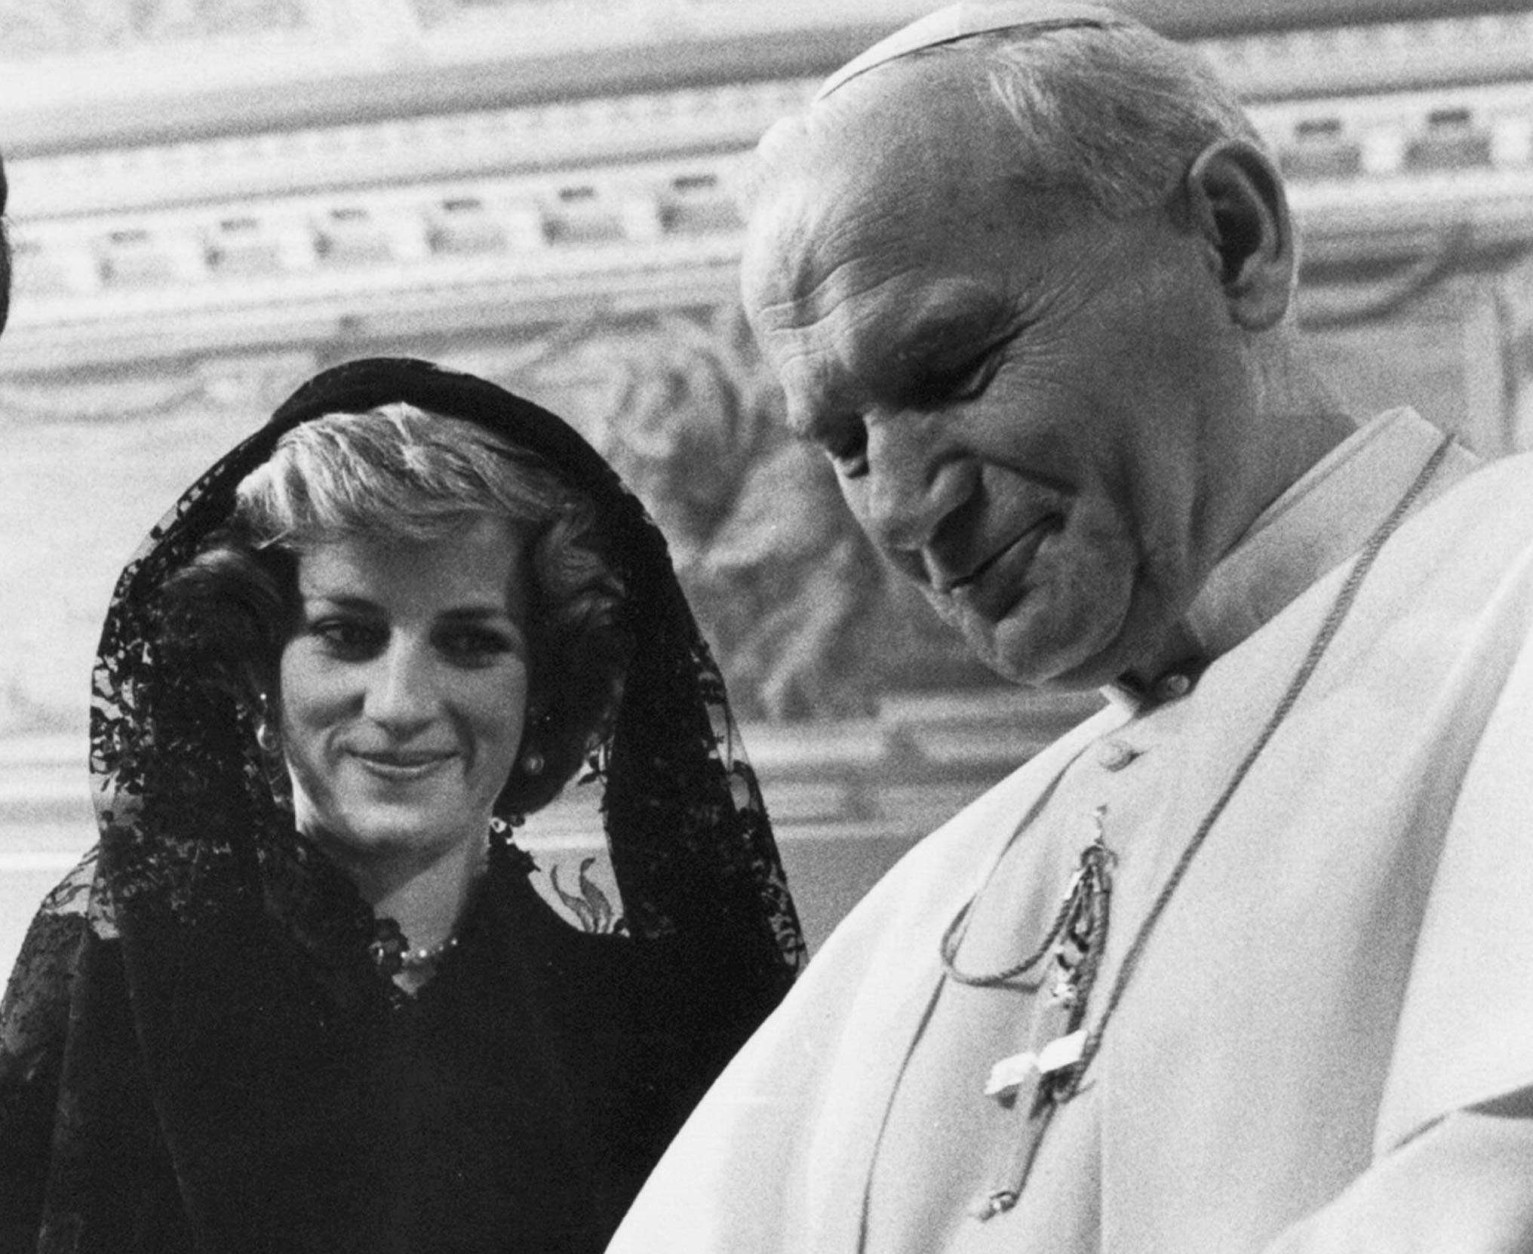 **  FILE  ** Pope John Paul II and  Diana, Princess of Wales are seen in this Aug. 29, 1985 file photo, on occasion of the private audience at the Vatican with her husband Prince Charles. Friday Aug. 31, 2007 marks the 10th anniversary of Princess Diana's death in a Paris car crash. (AP Photo/Ron Bell)